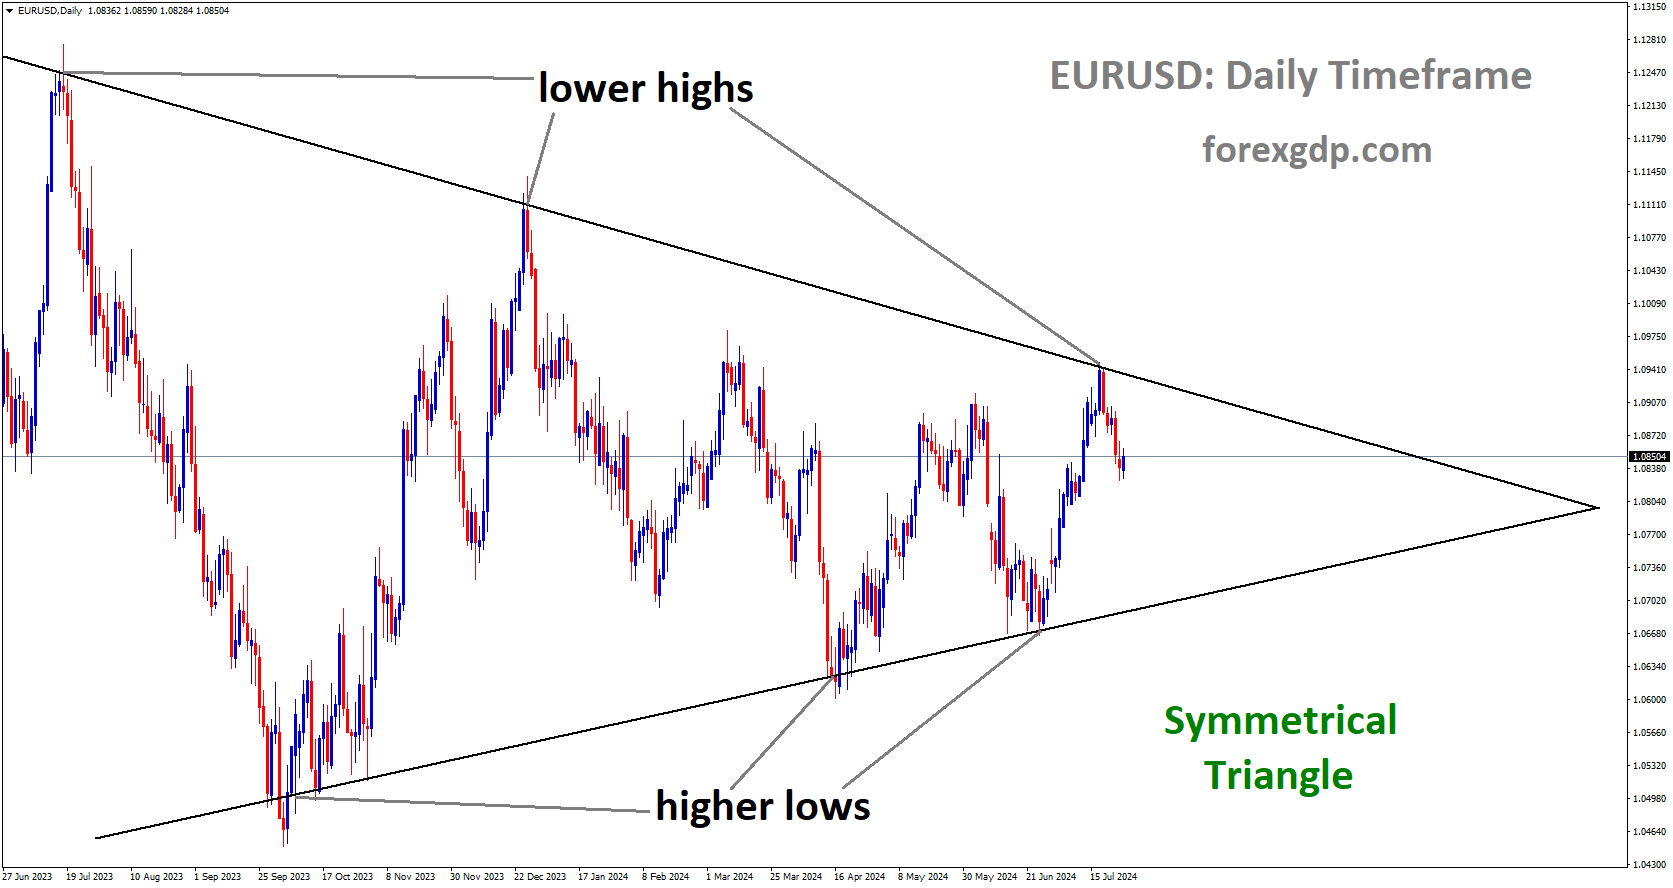 EURUSD is moving in Symmetrical Triangle and market has fallen from the lower high area of the pattern